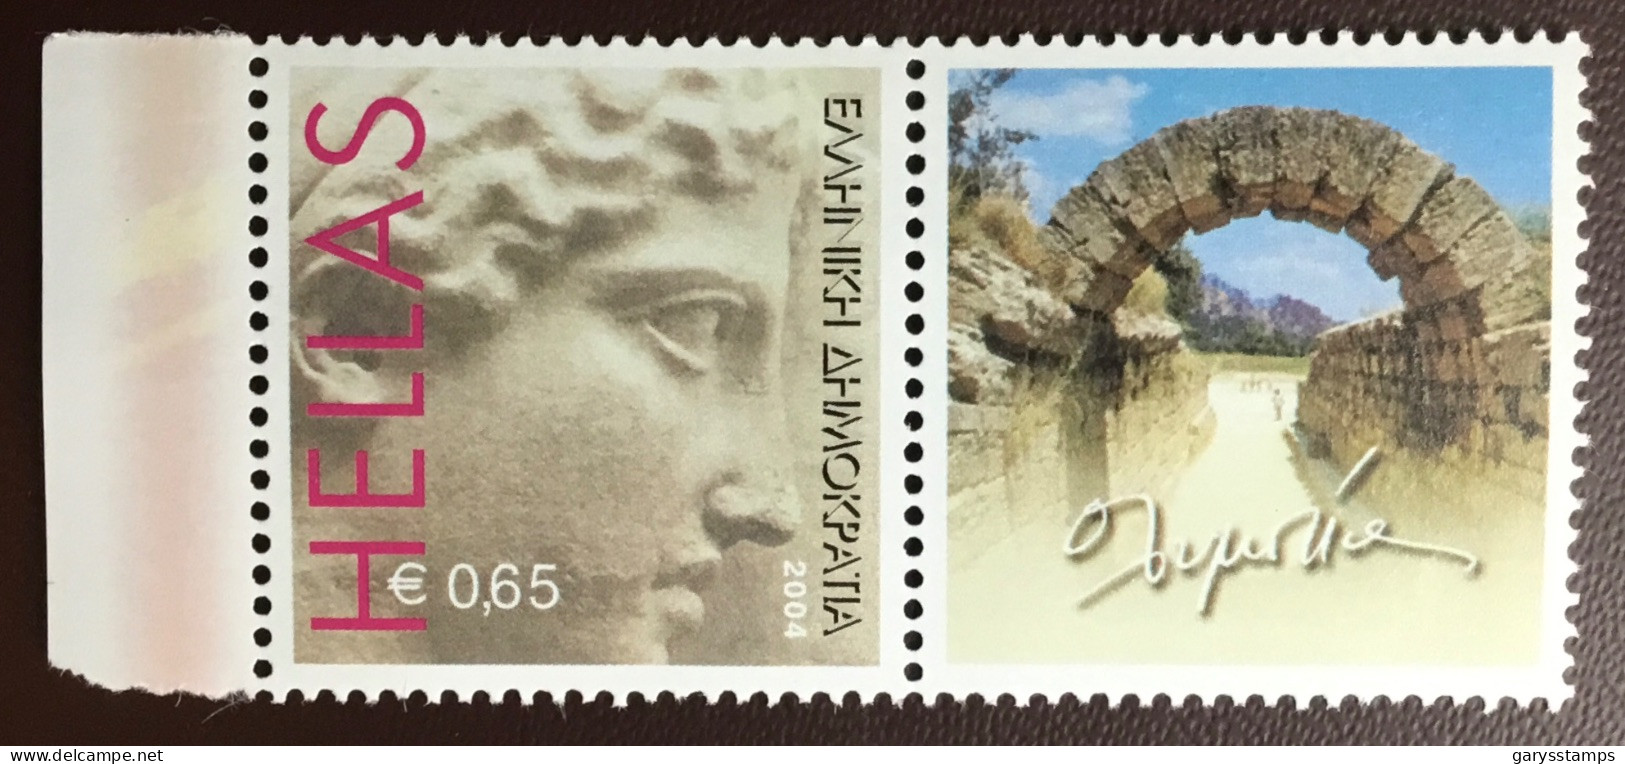 Greece 2003 Greetings Stamp MNH - Unused Stamps